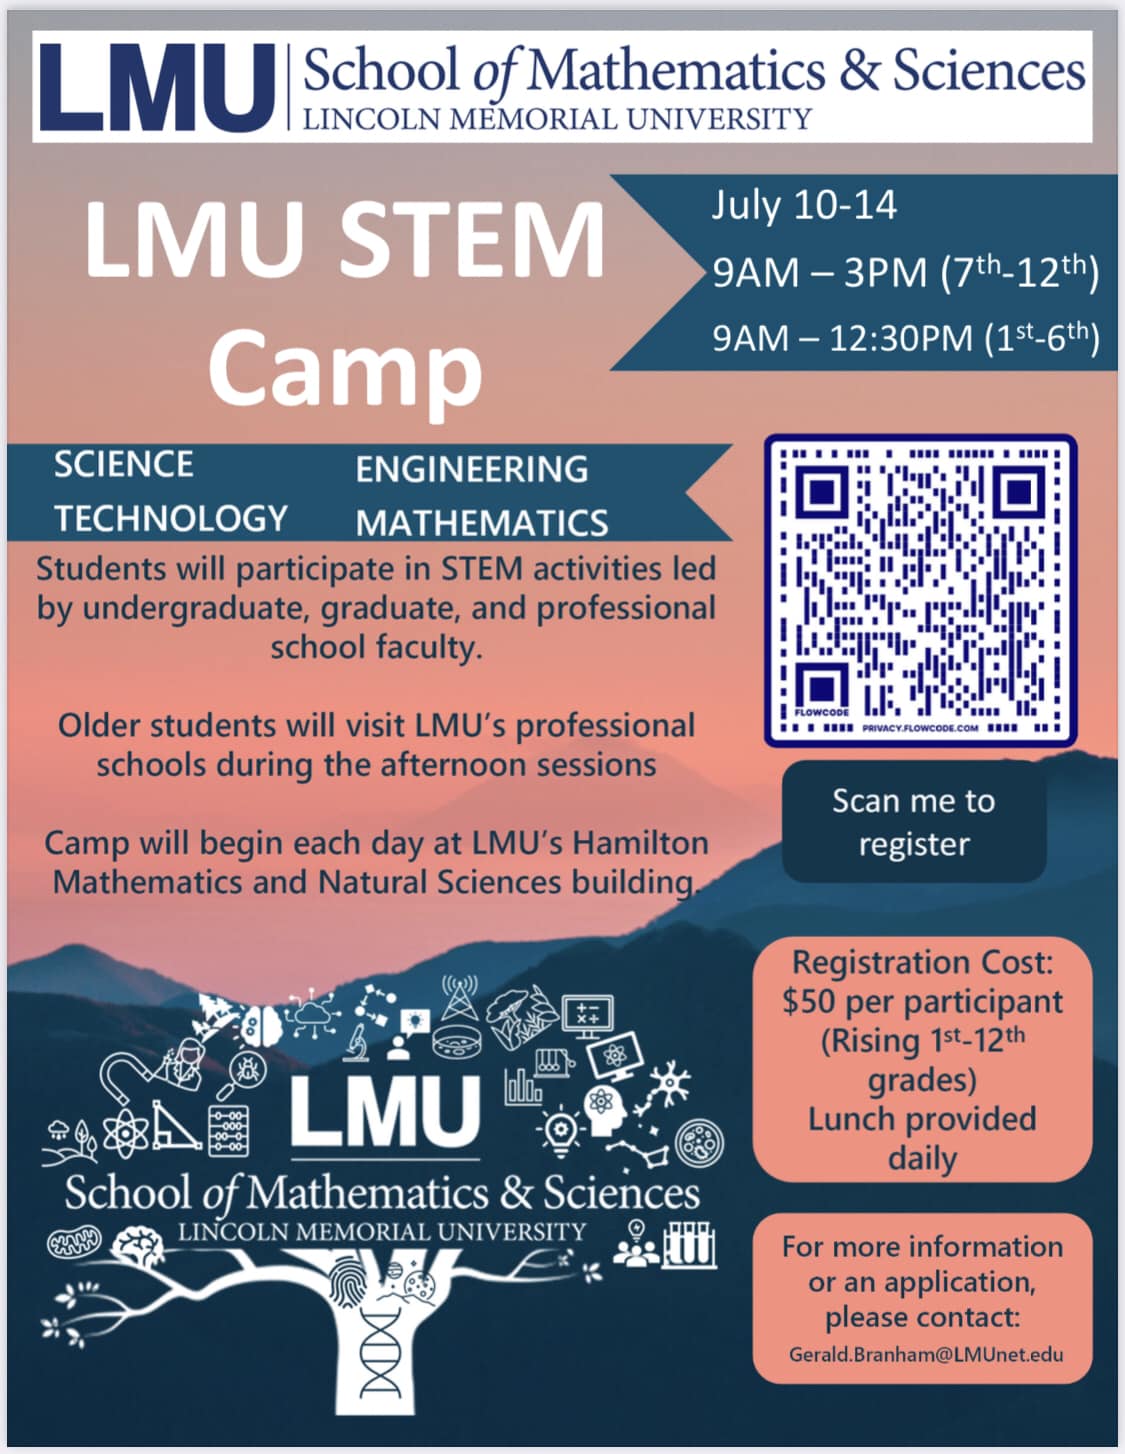 Students will participate in STEM activities led by undergraduate, graduate, and professional school faculty. Older students will visit LMU's professional schools during the afternoon sessions. $50 per participant, rising 1st-12th grades, lunch provided daily.